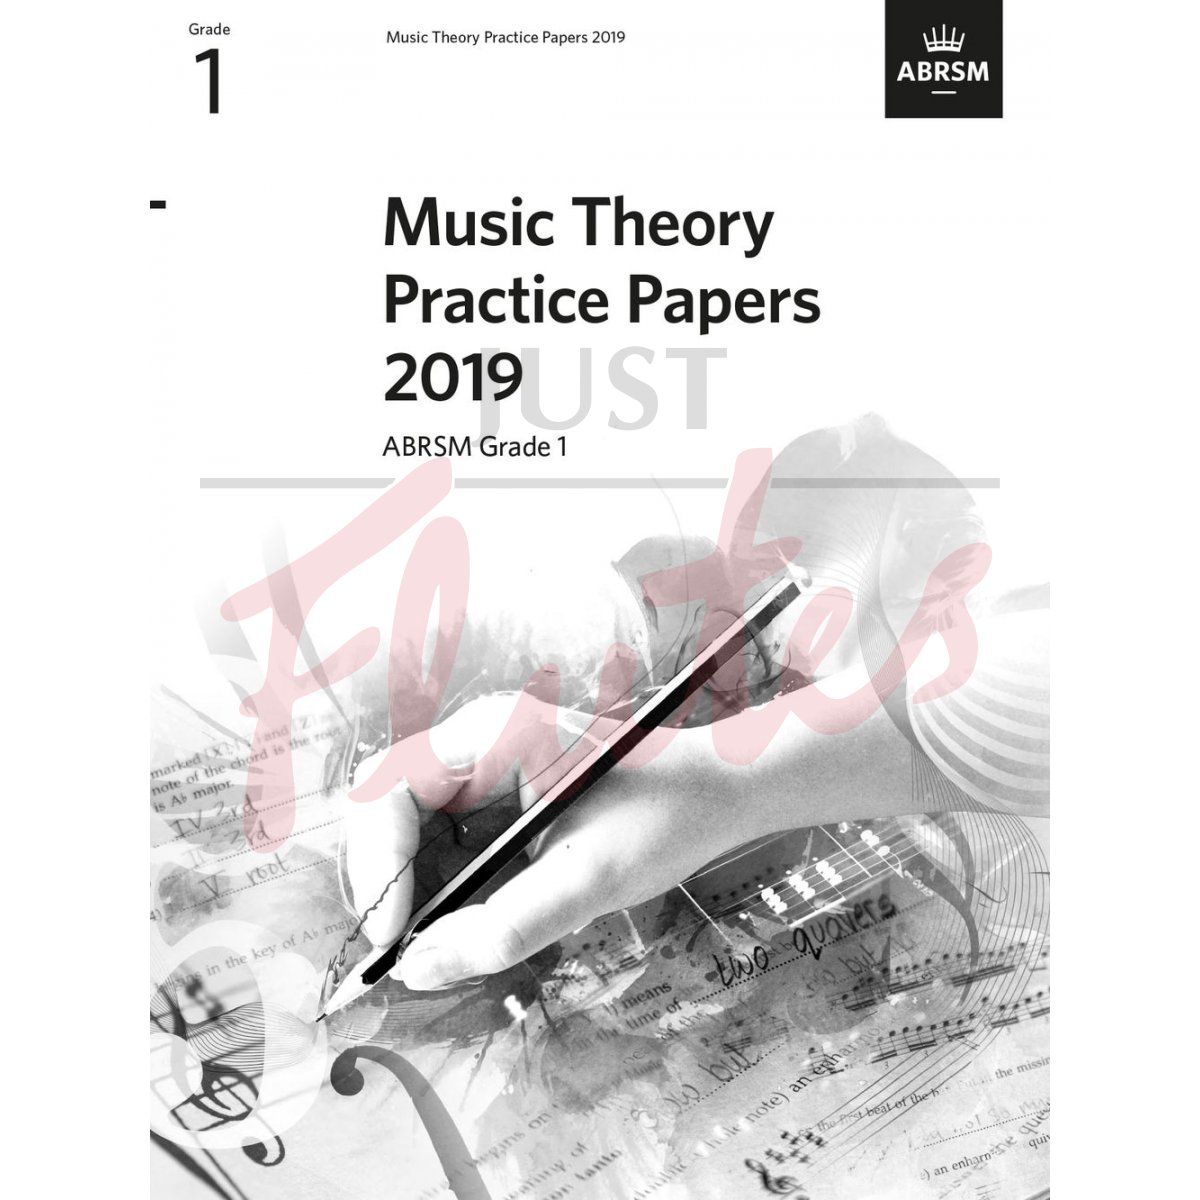 Music Theory Practice Papers 2019 Grade 1